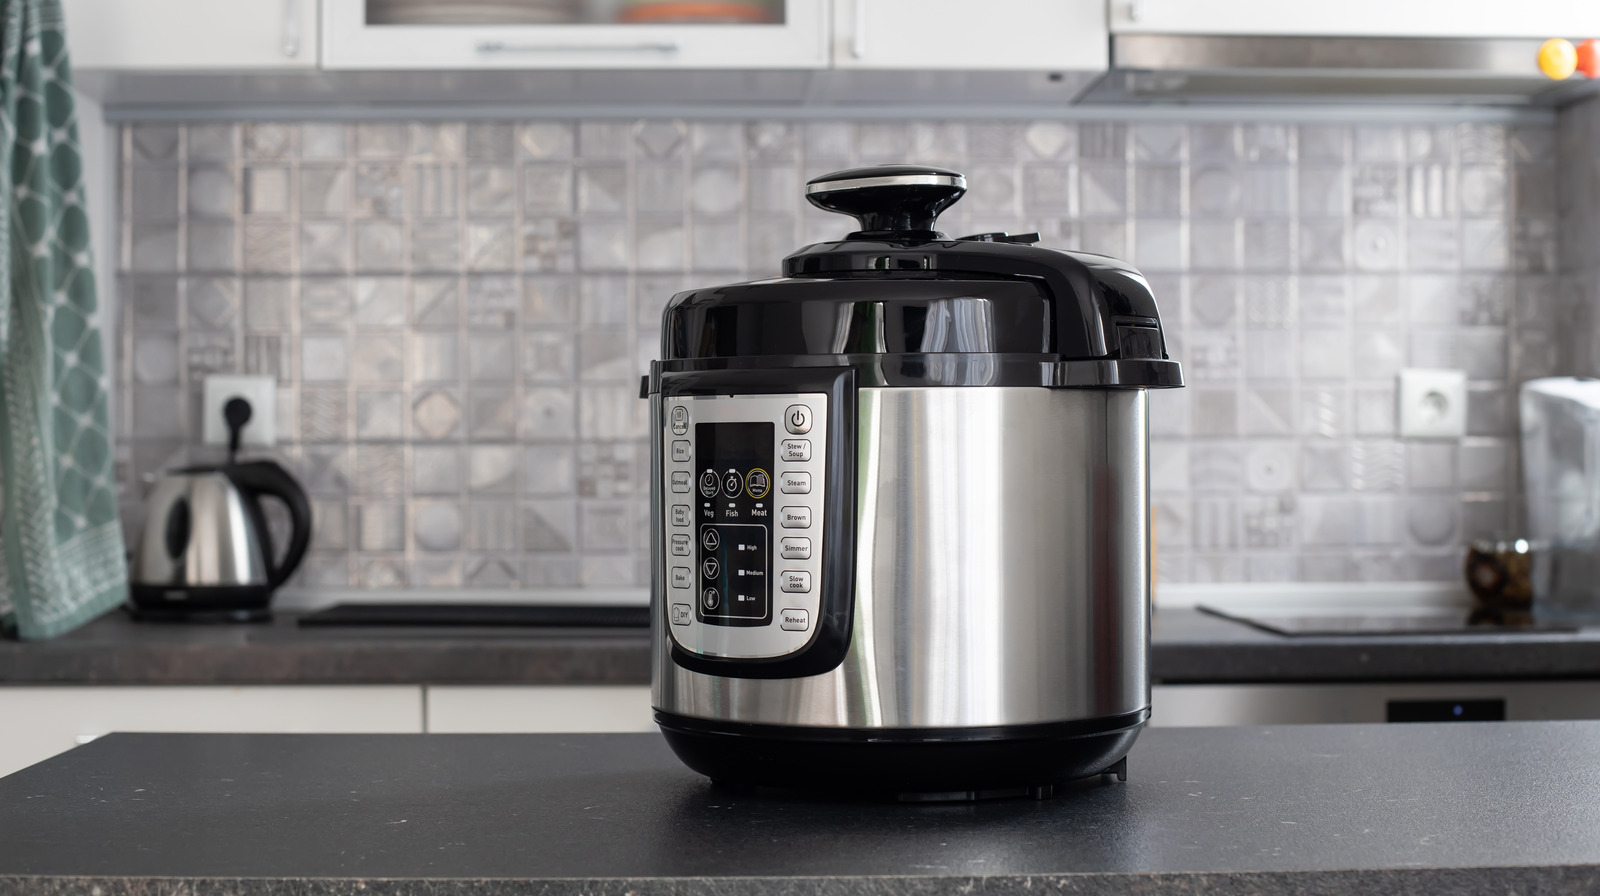 HOW TO USE AN ELECTRIC PRESSURE COOKER  Pressure cookers can feel a little  bit overwhelming when you first start using them. Learn how to use an electric  pressure cooker like a